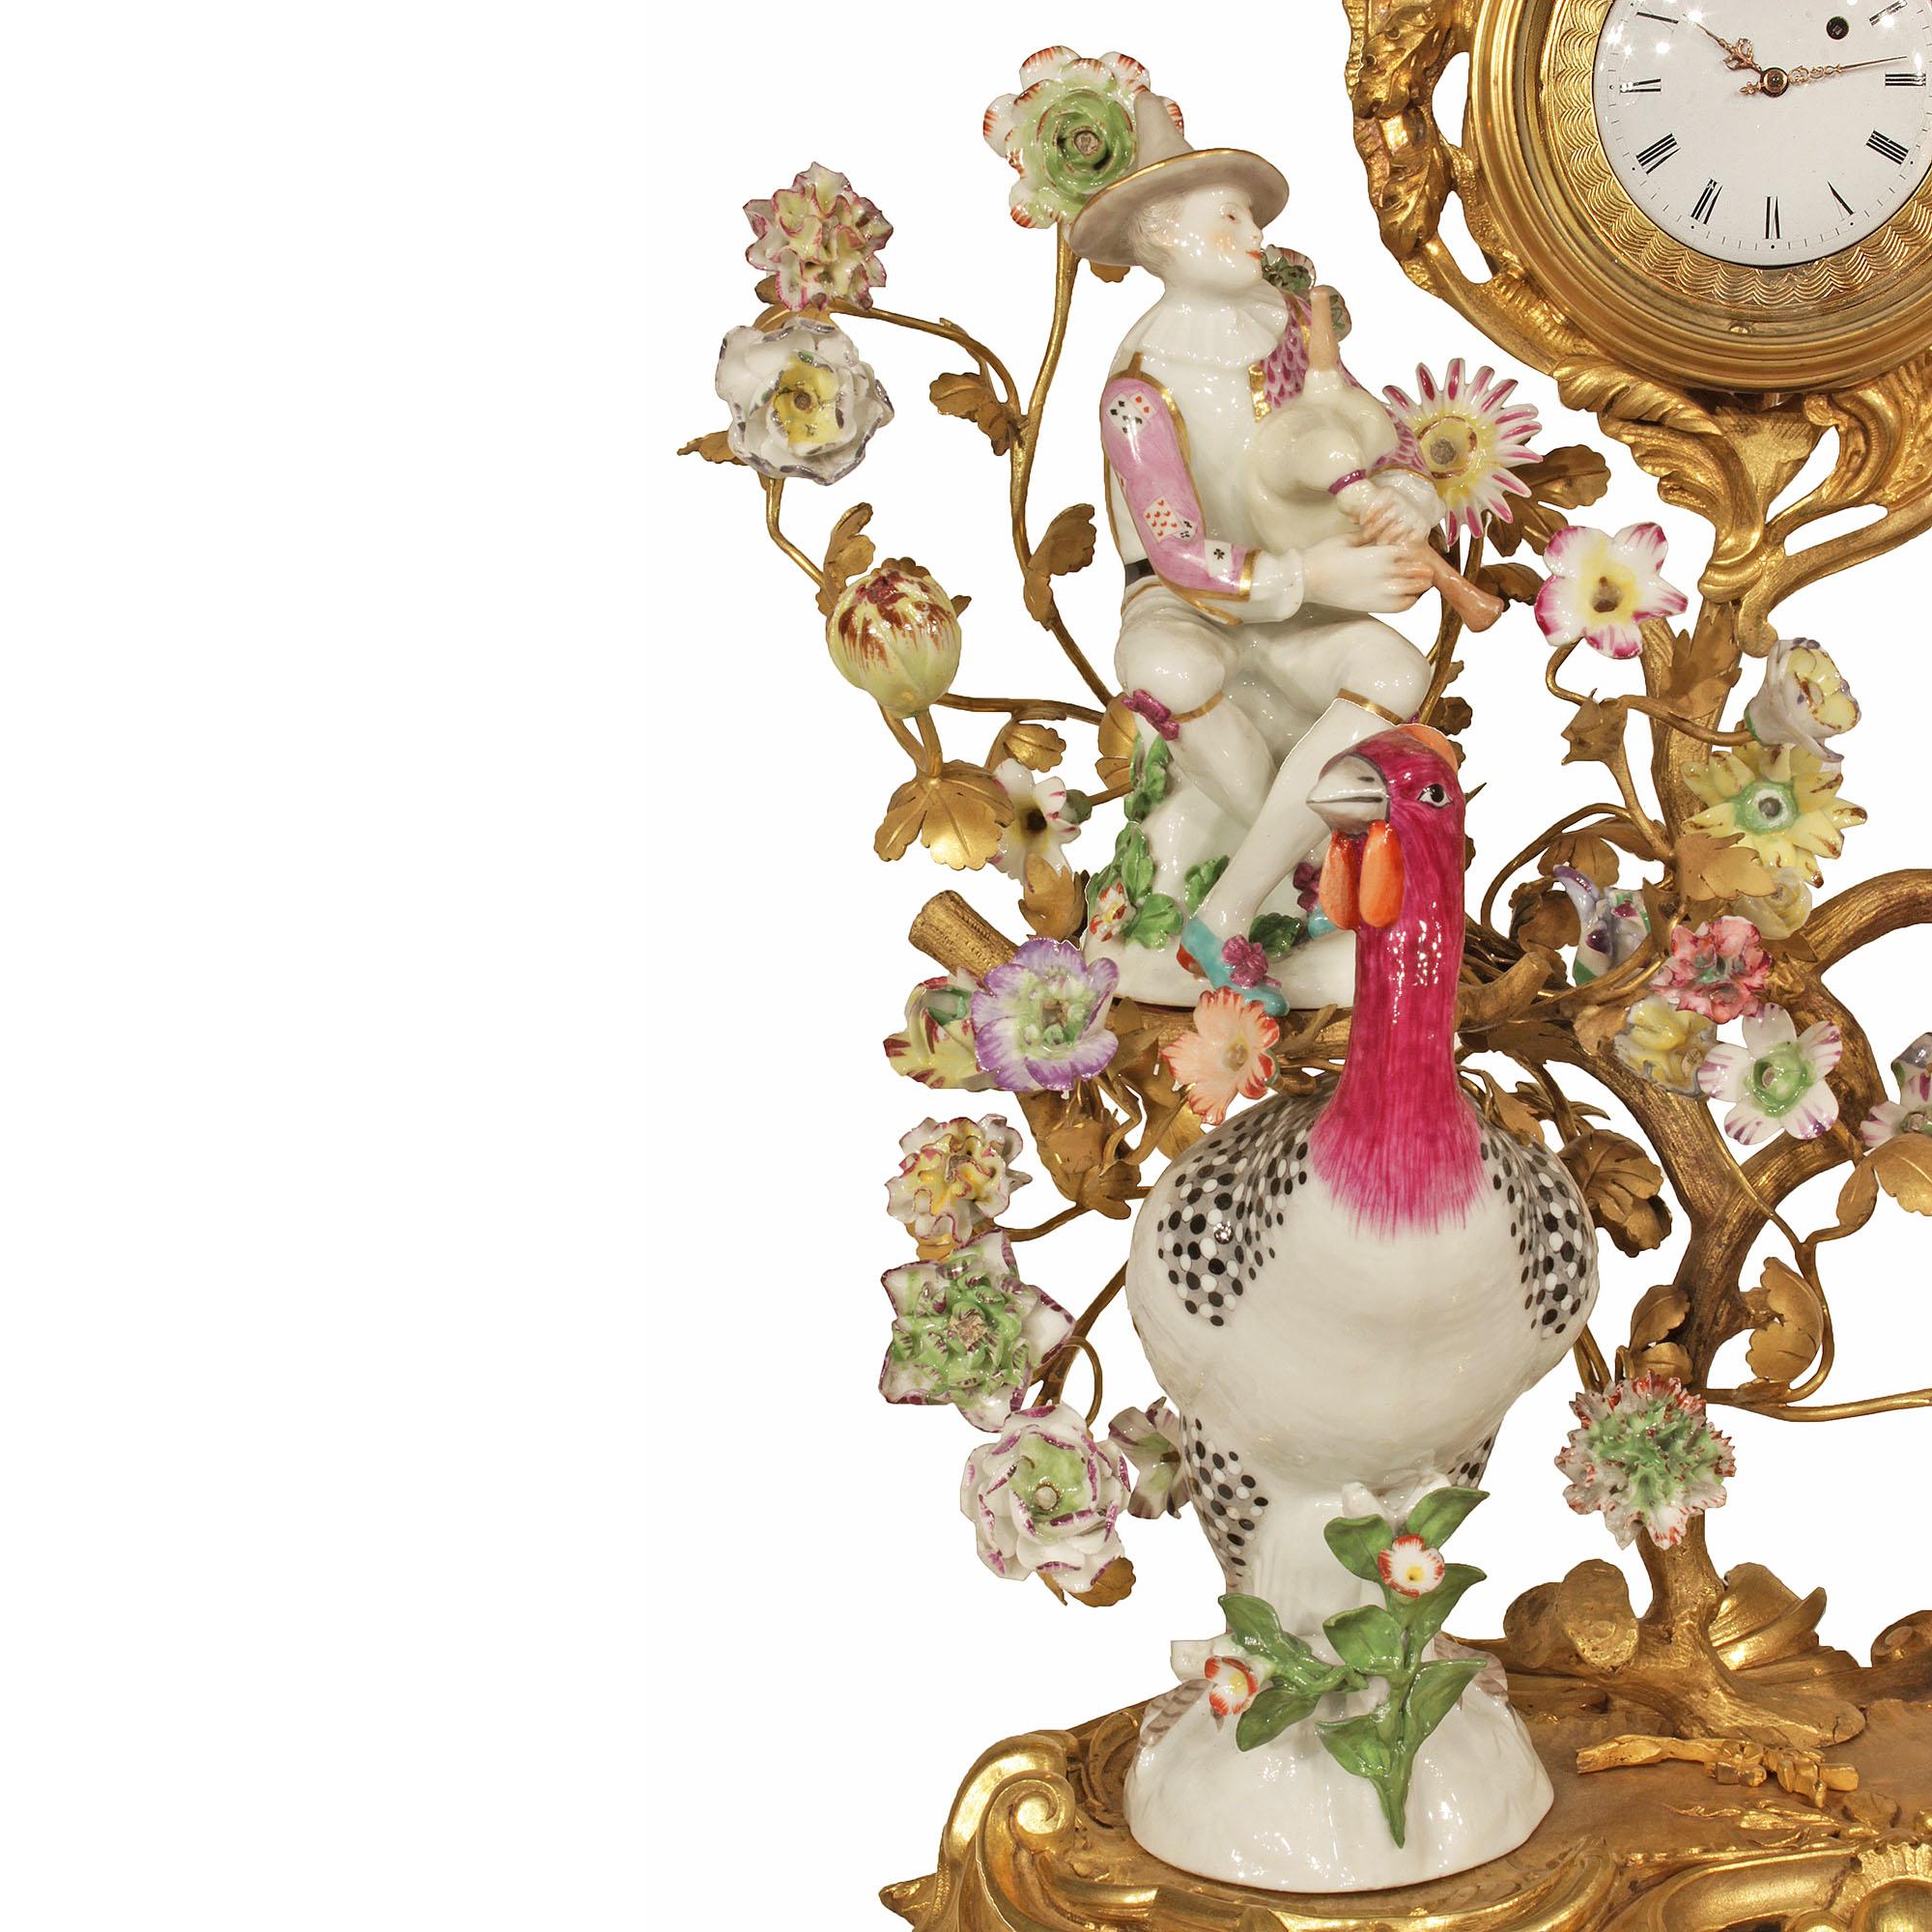 An attractive and high-quality French 19th century Louis XV style porcelain and ormolu clock signed Meissen. The clock is raised by a stunning pierced ormolu base with scrolled design and a handsome pair of guinea fowl. At the center is a scrolling